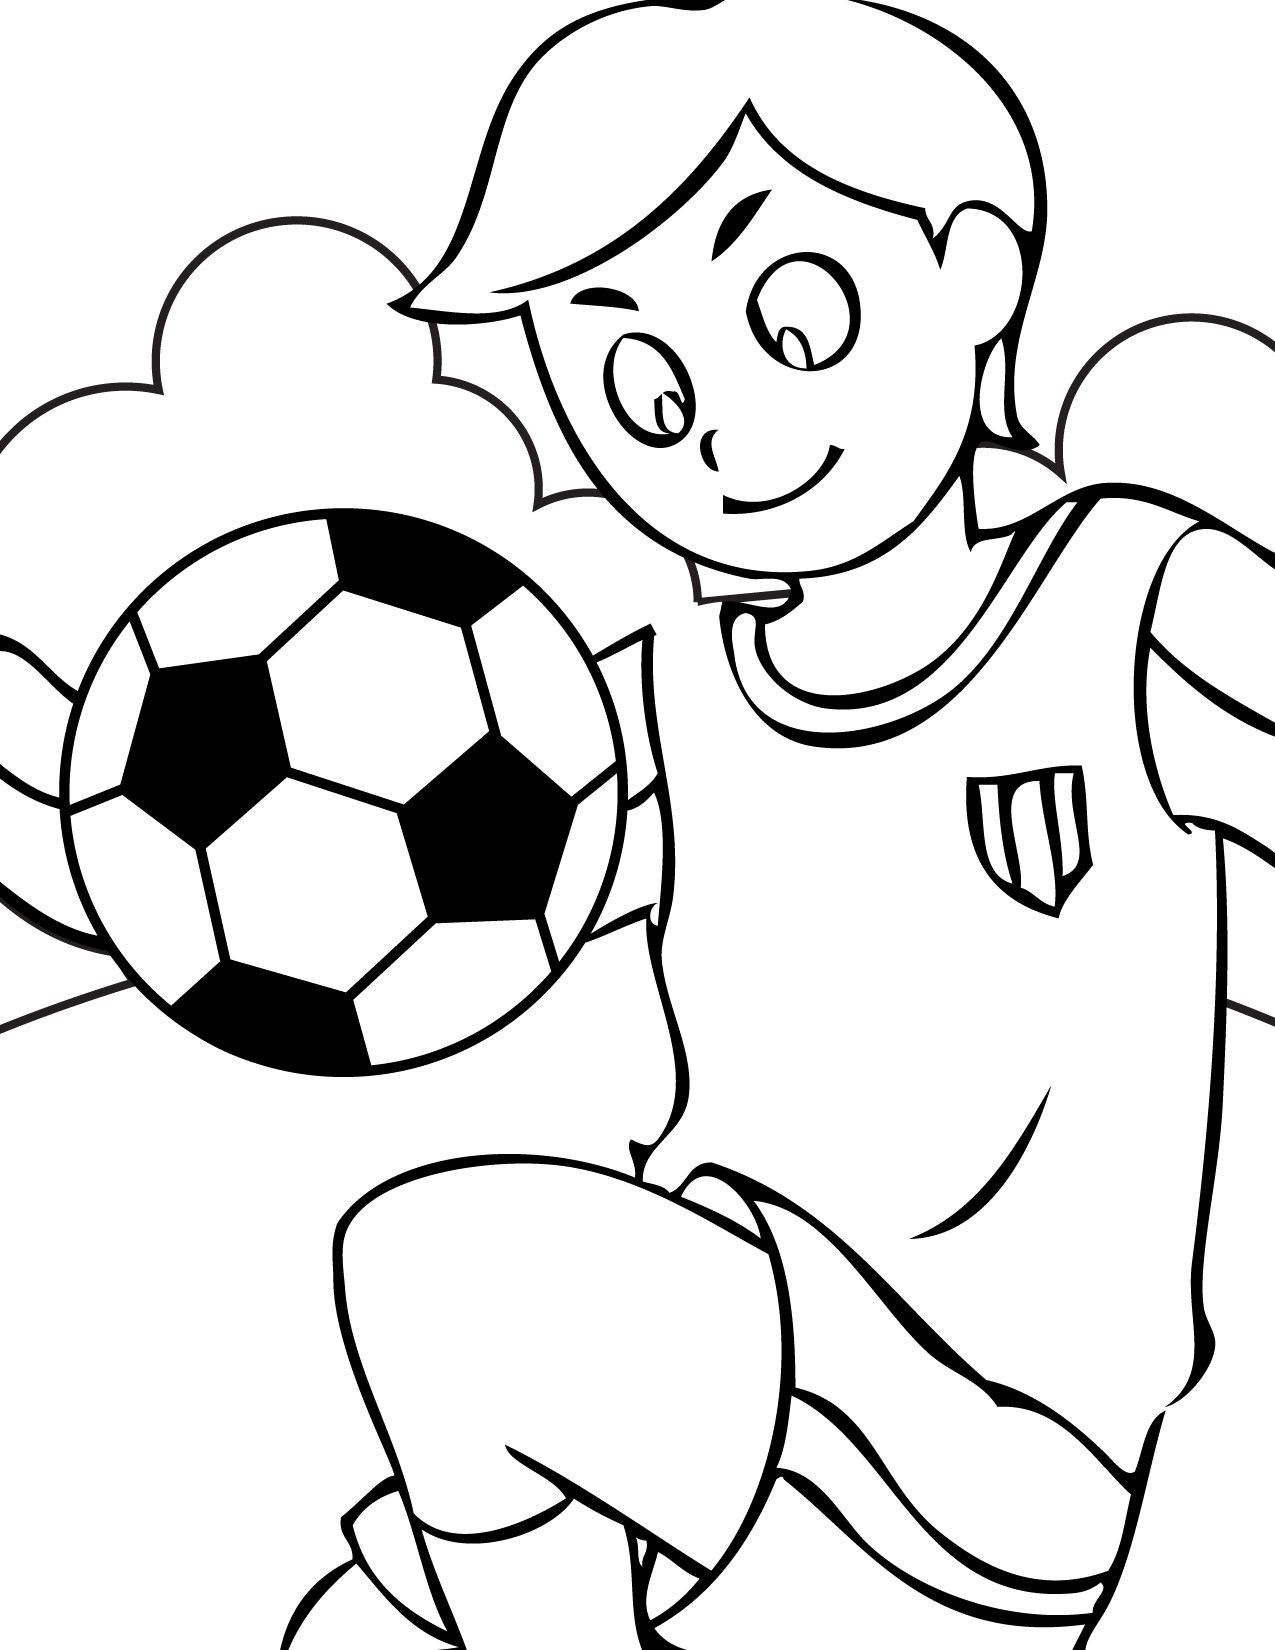 Coloring Sheets For Boys Soccer
 Sports Themed Coloring Pages Print